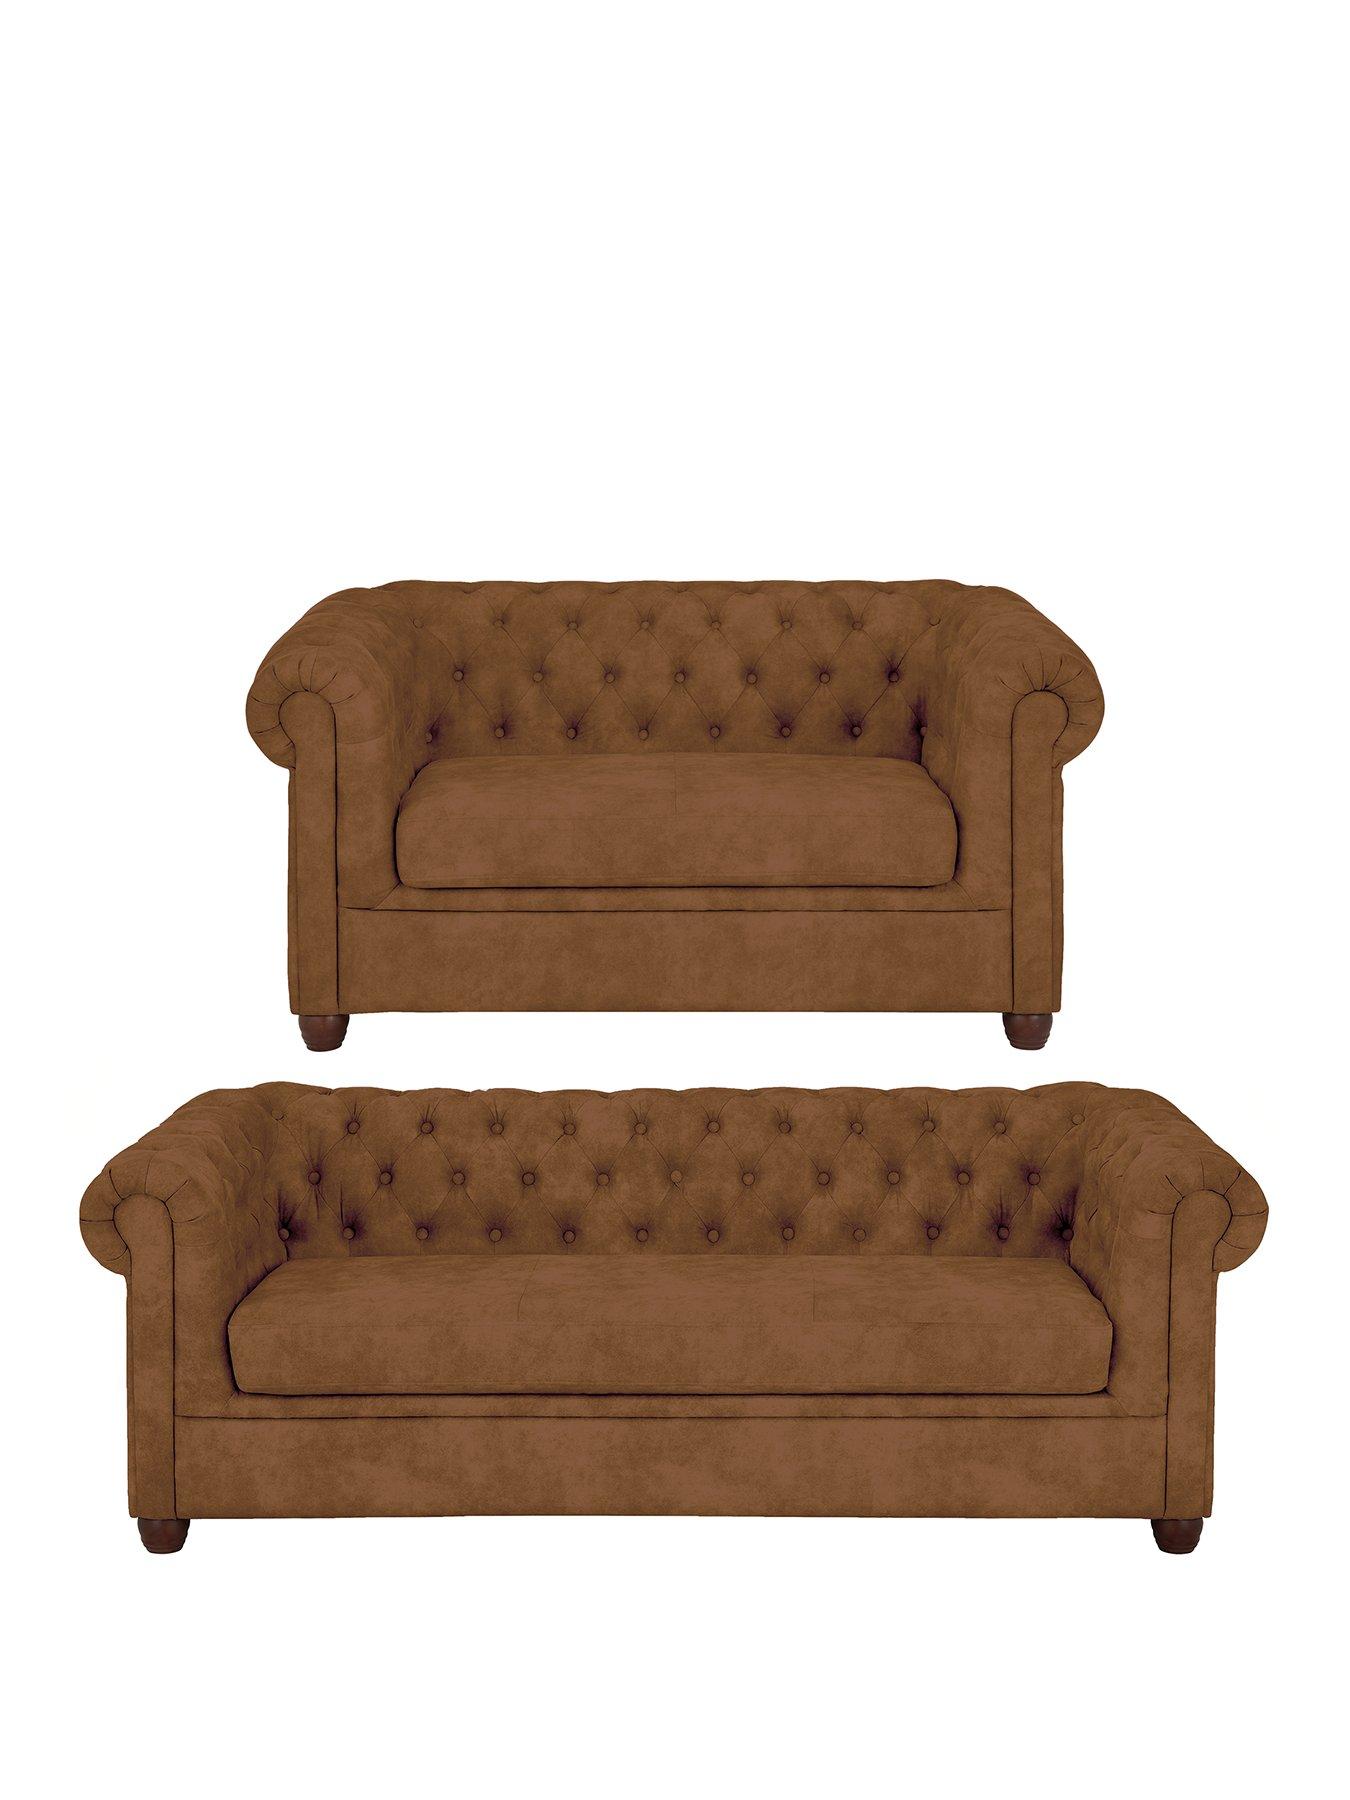 Details about   Traditional Living Room 2-Piece 100% Leather Sofa Loveseat Couch Set Brown